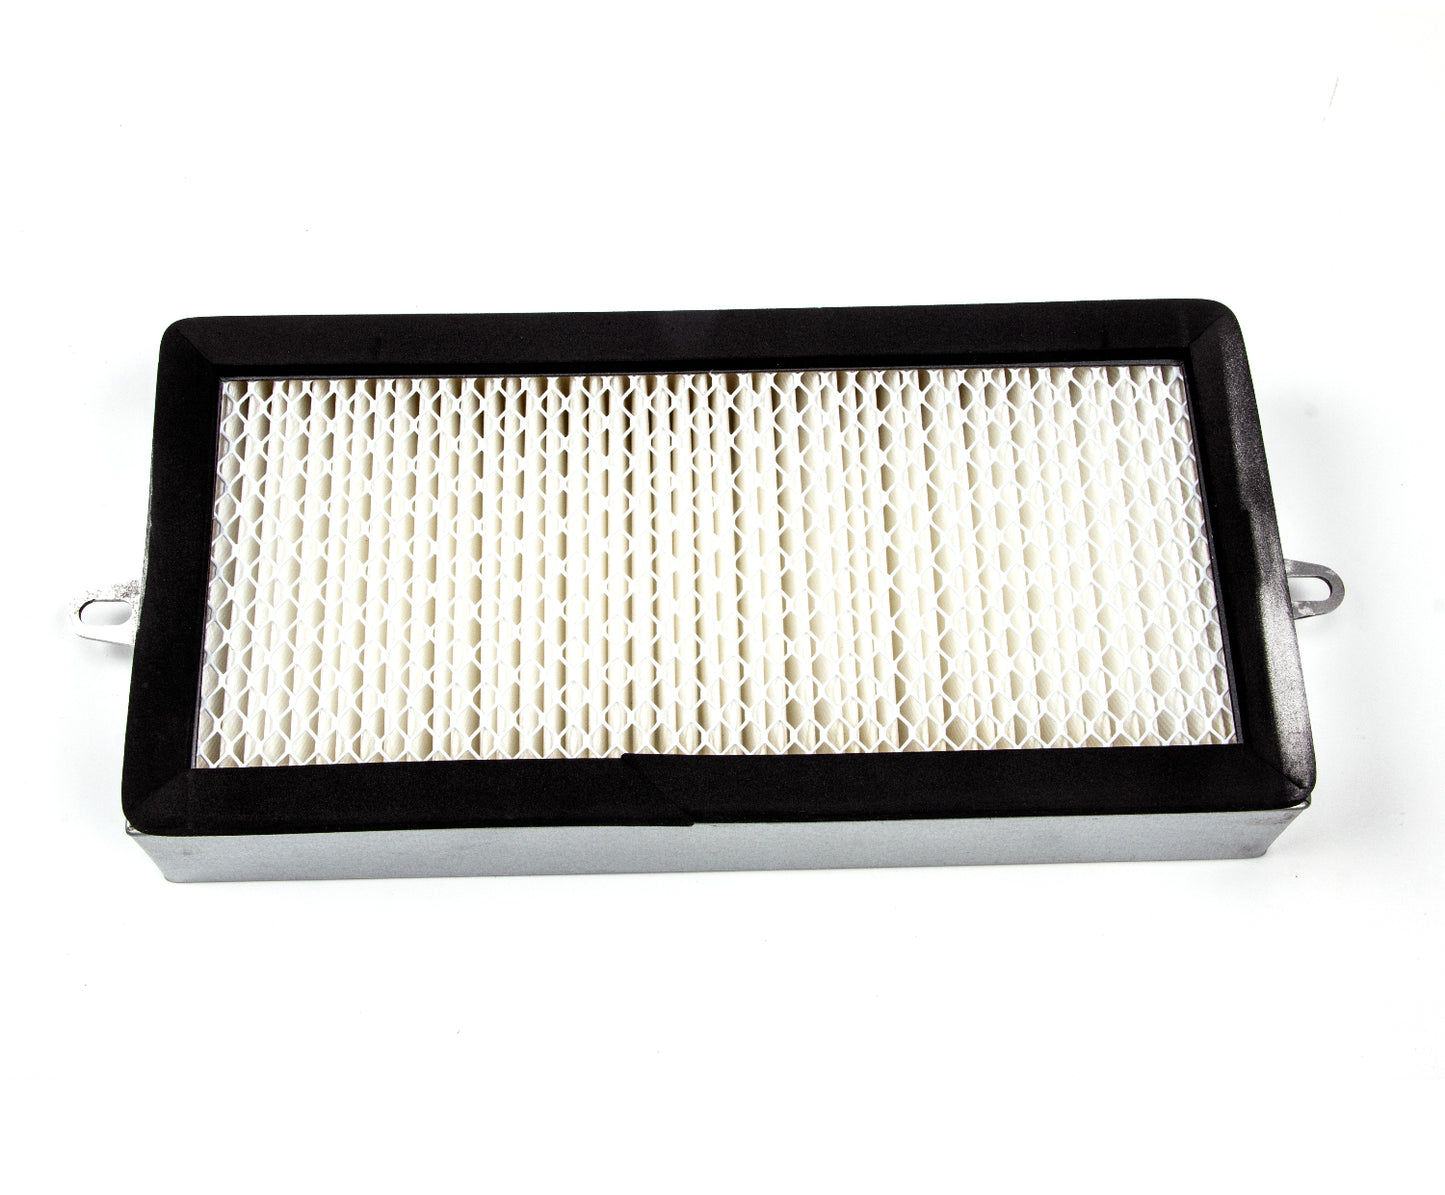 Dust Panel Filter for SANITMAX SM1050 Electric Floor Sweeper